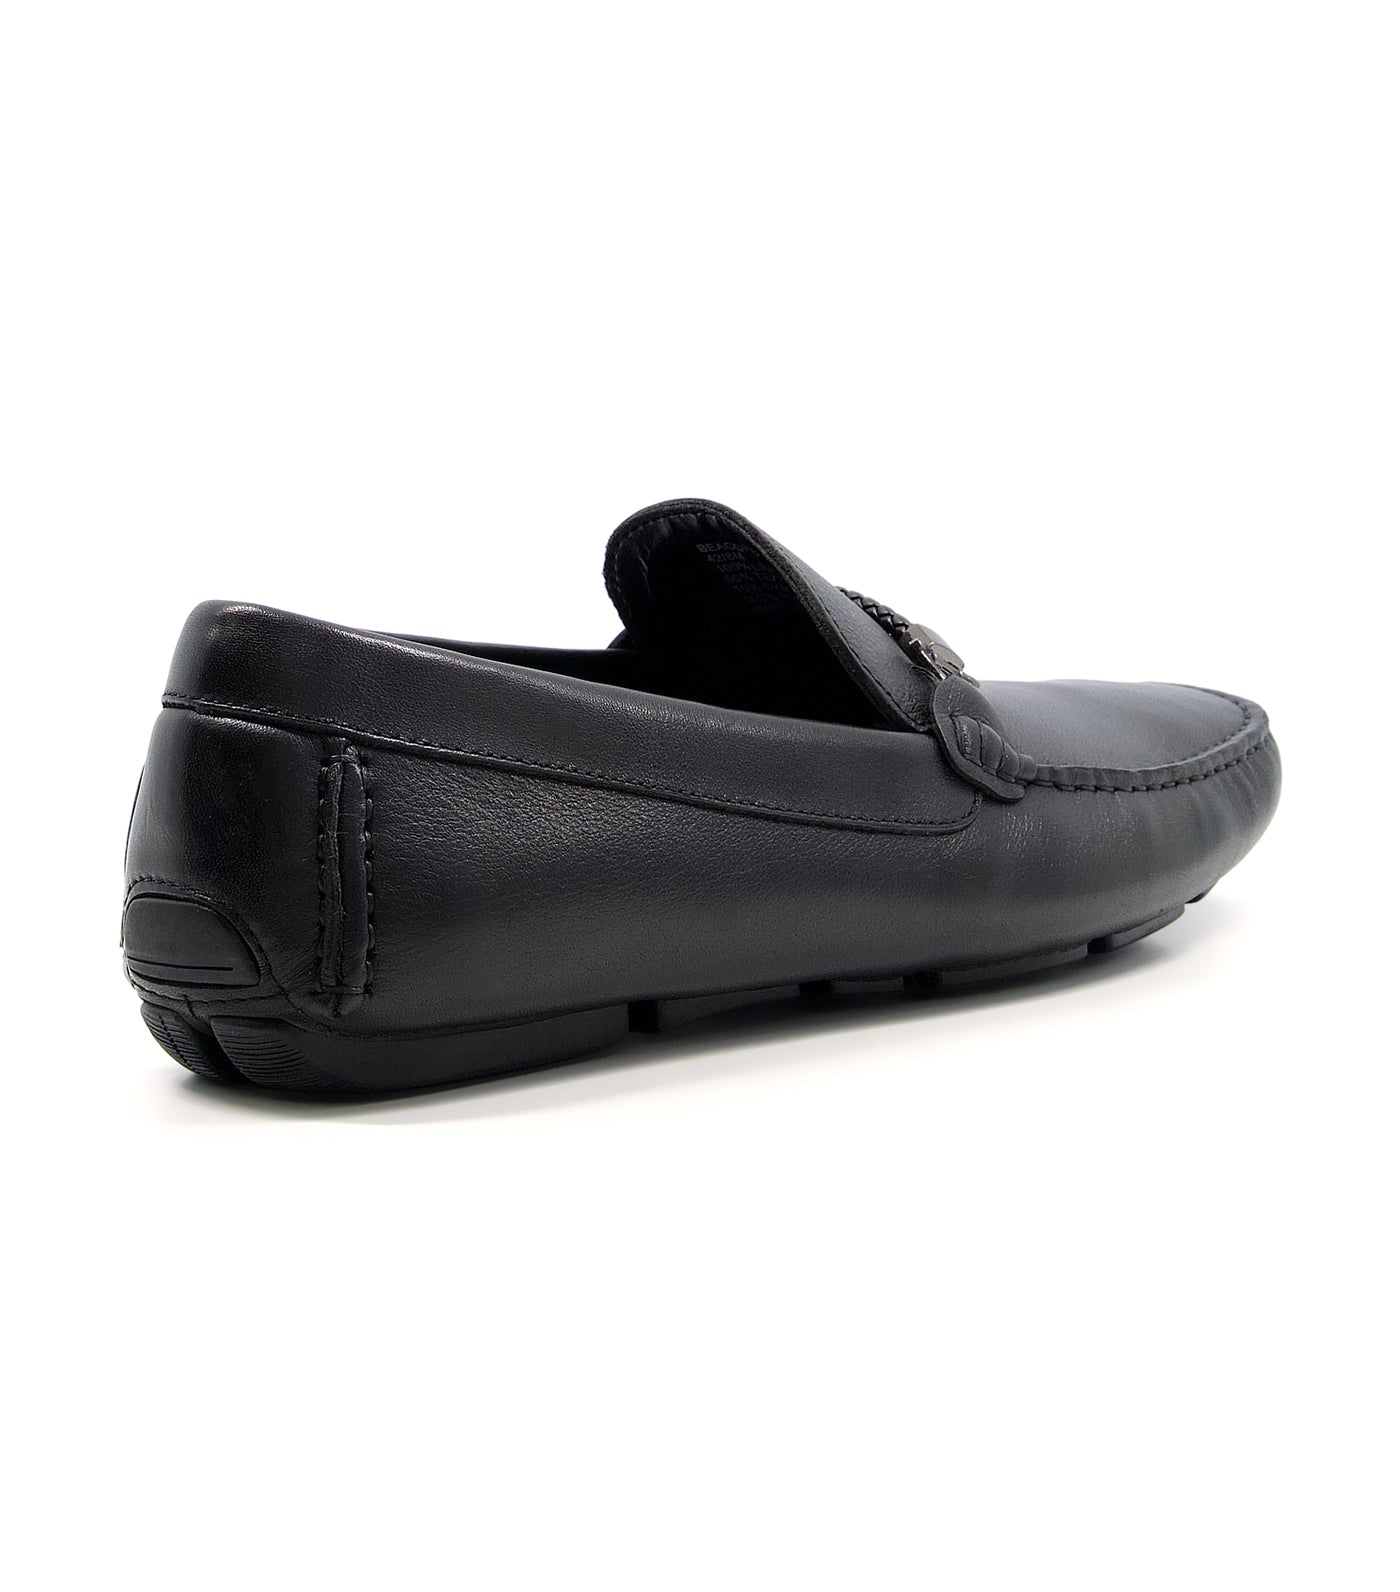 Beacons Moccasins Black-Leather